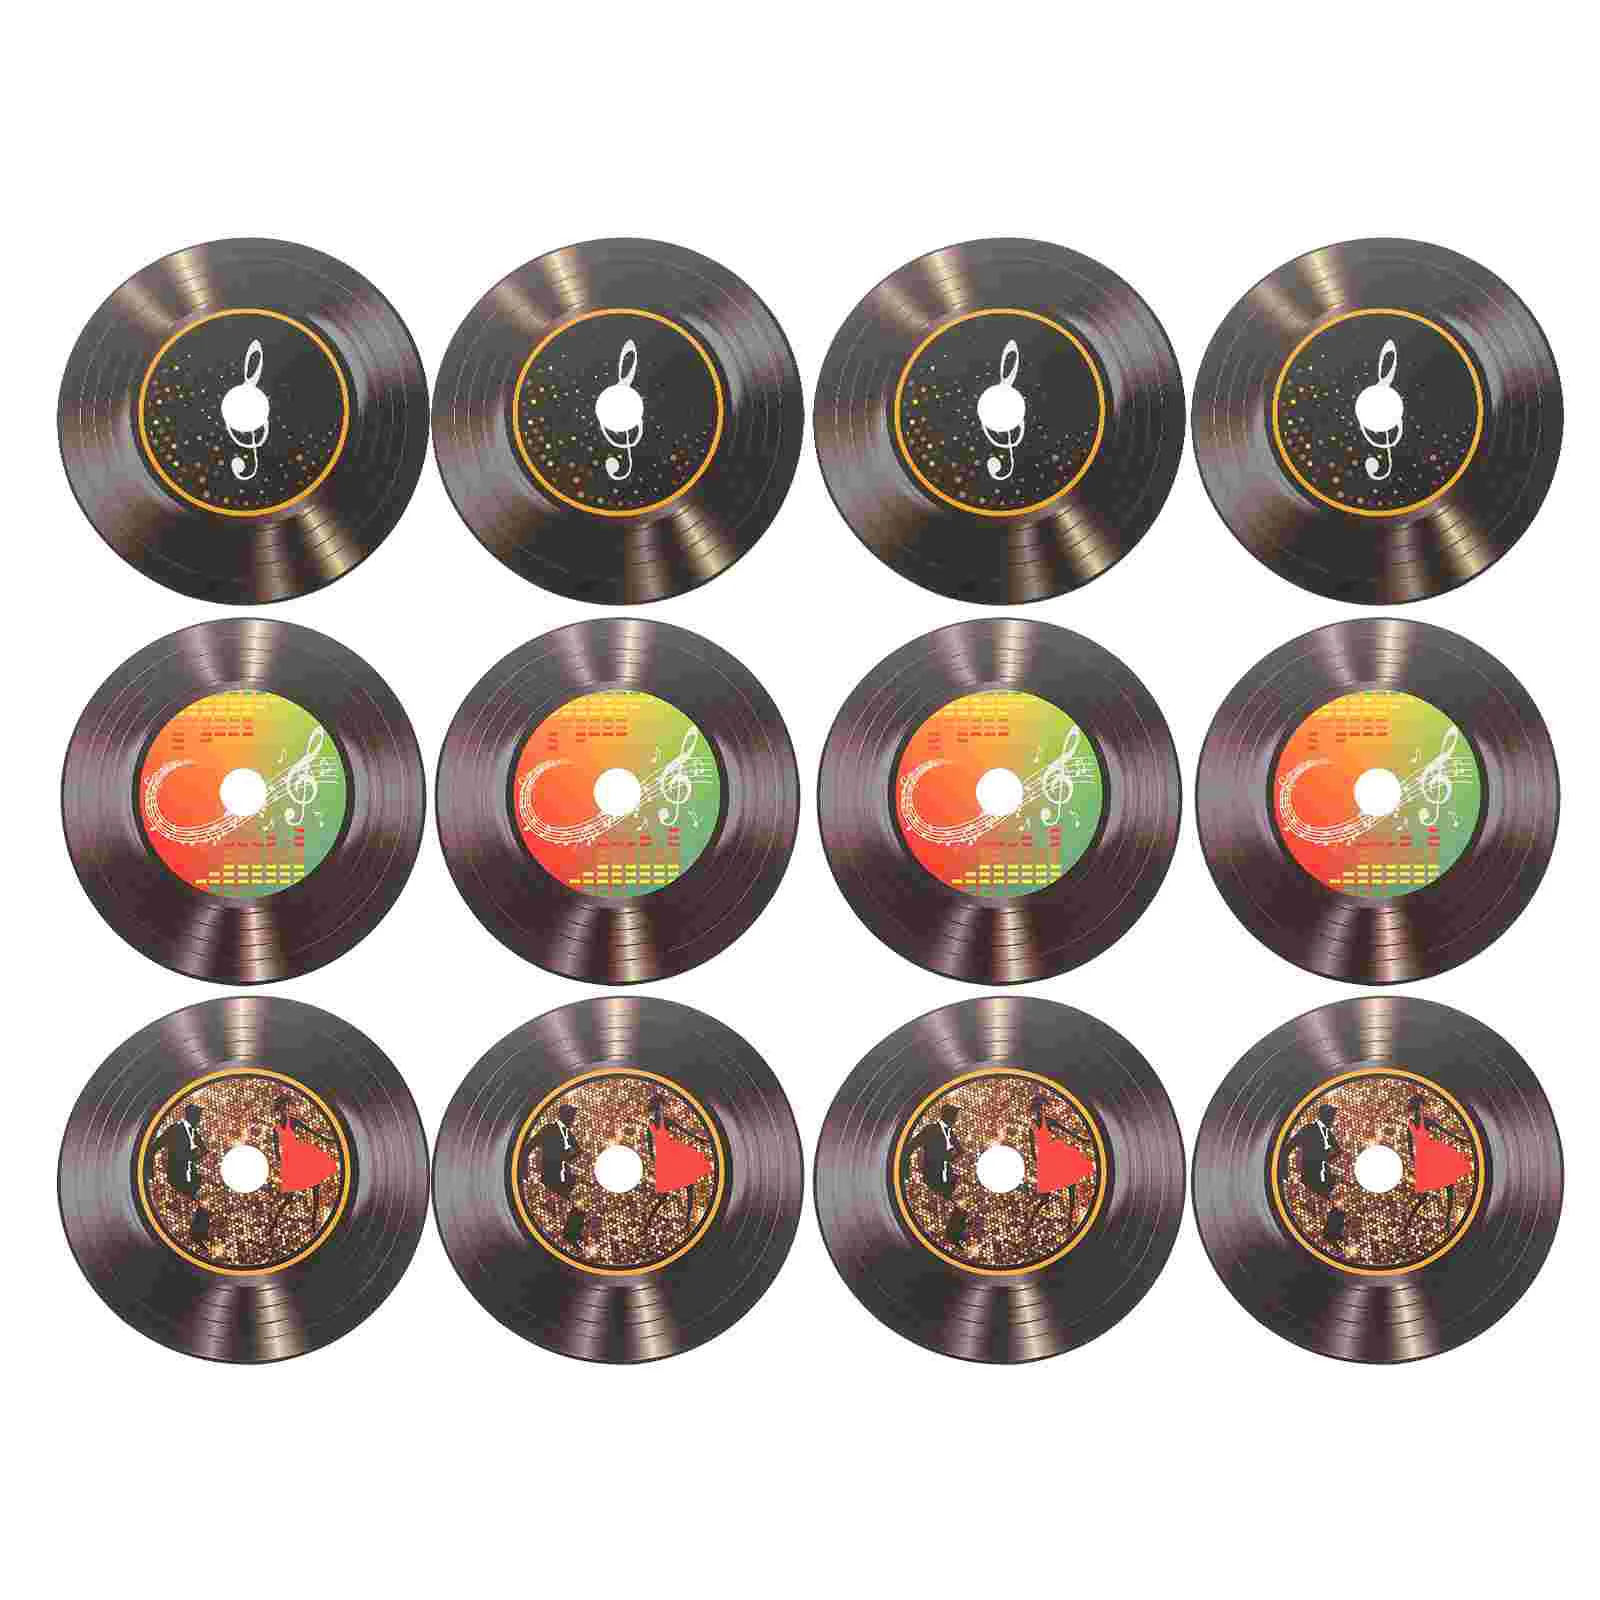 

Vinyl Record Decoration Decorative Records Cds For Aesthetic Disco Shop Wall Ornaments